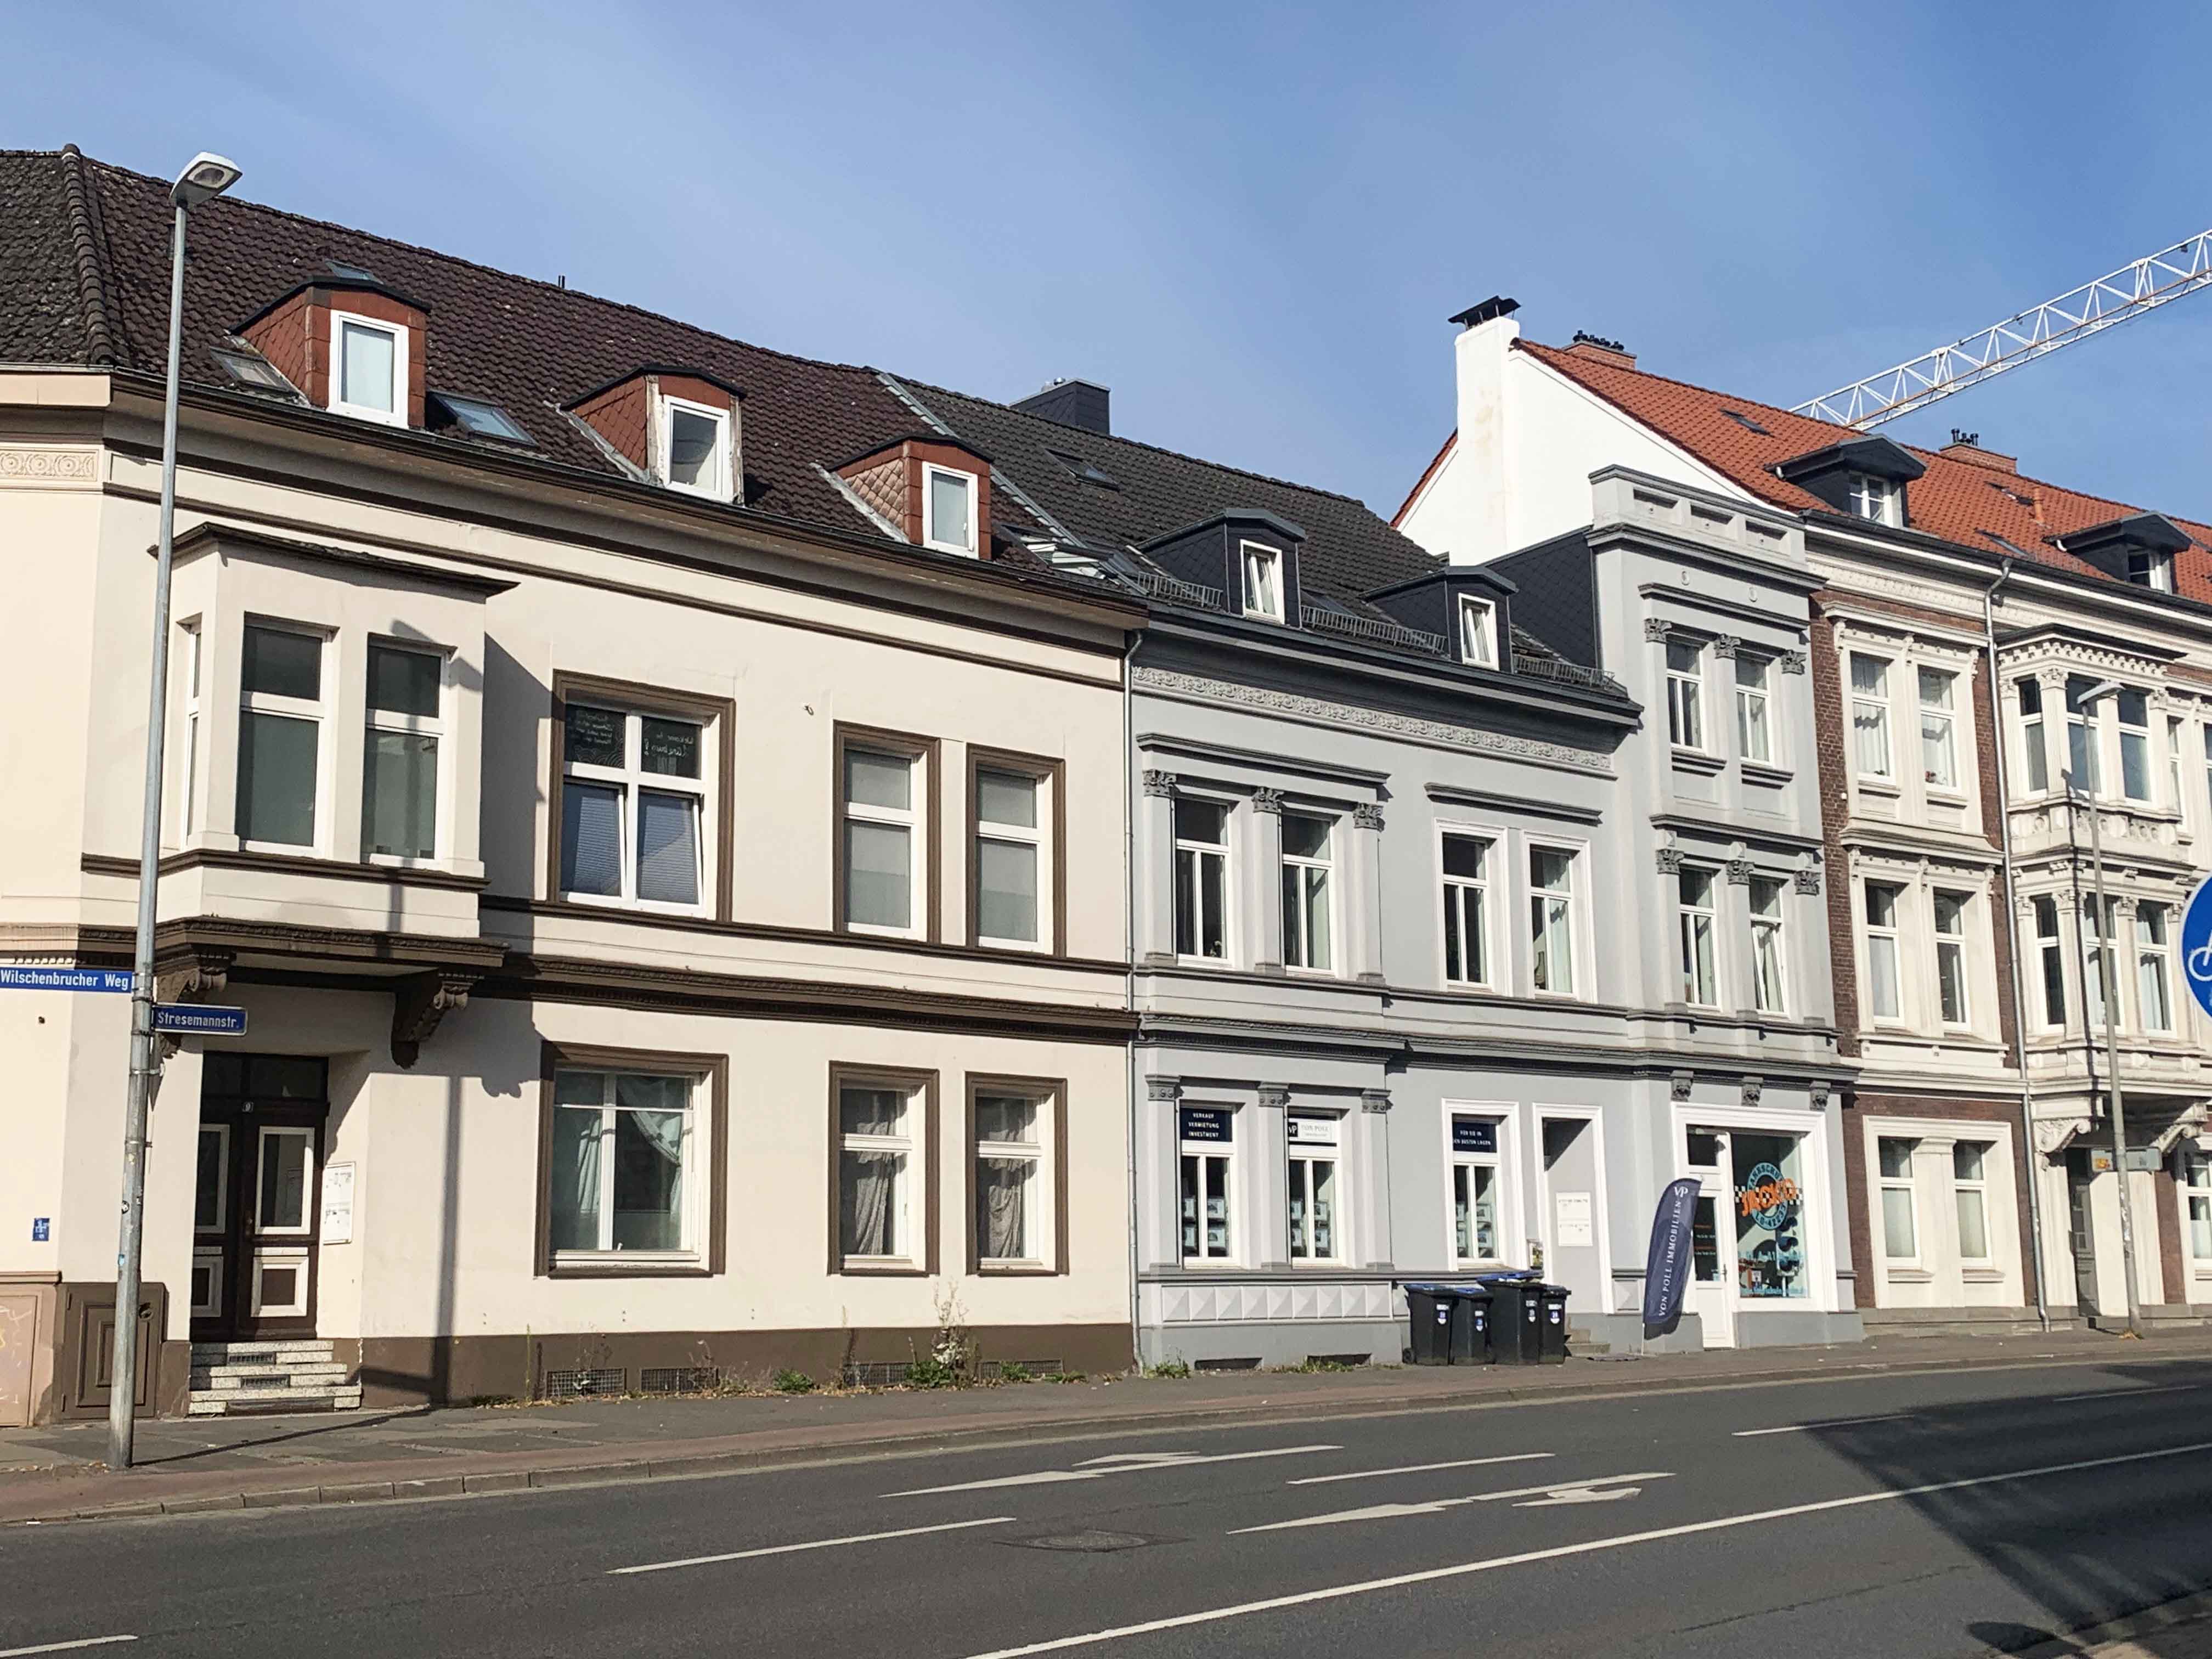 Exterior of student apartment in Luneburg, Germany.